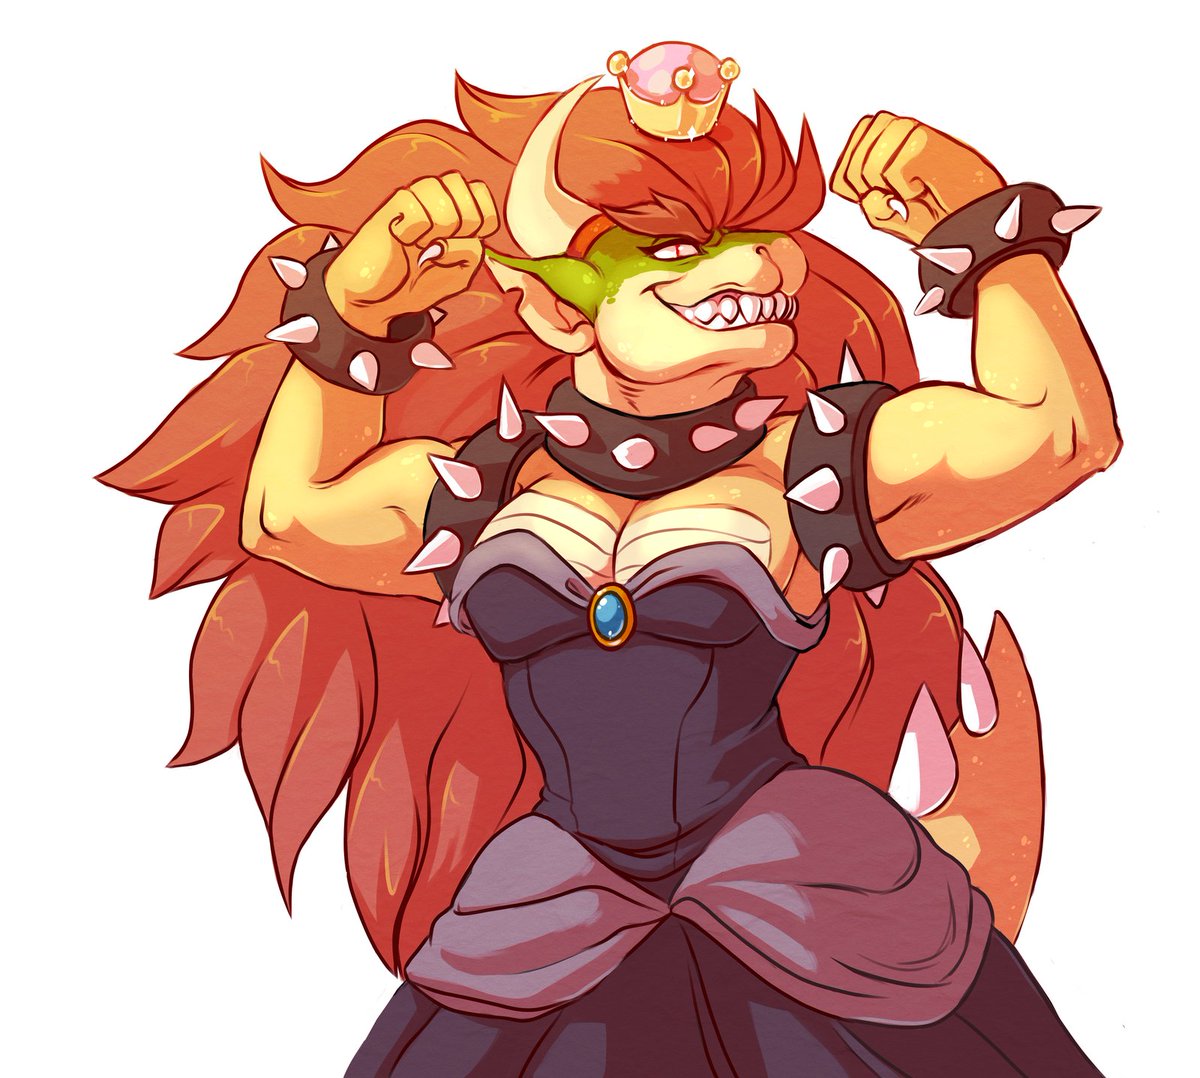 Let's get her as a skin for Bowser in Smash please!https://buff.ly/2BE...